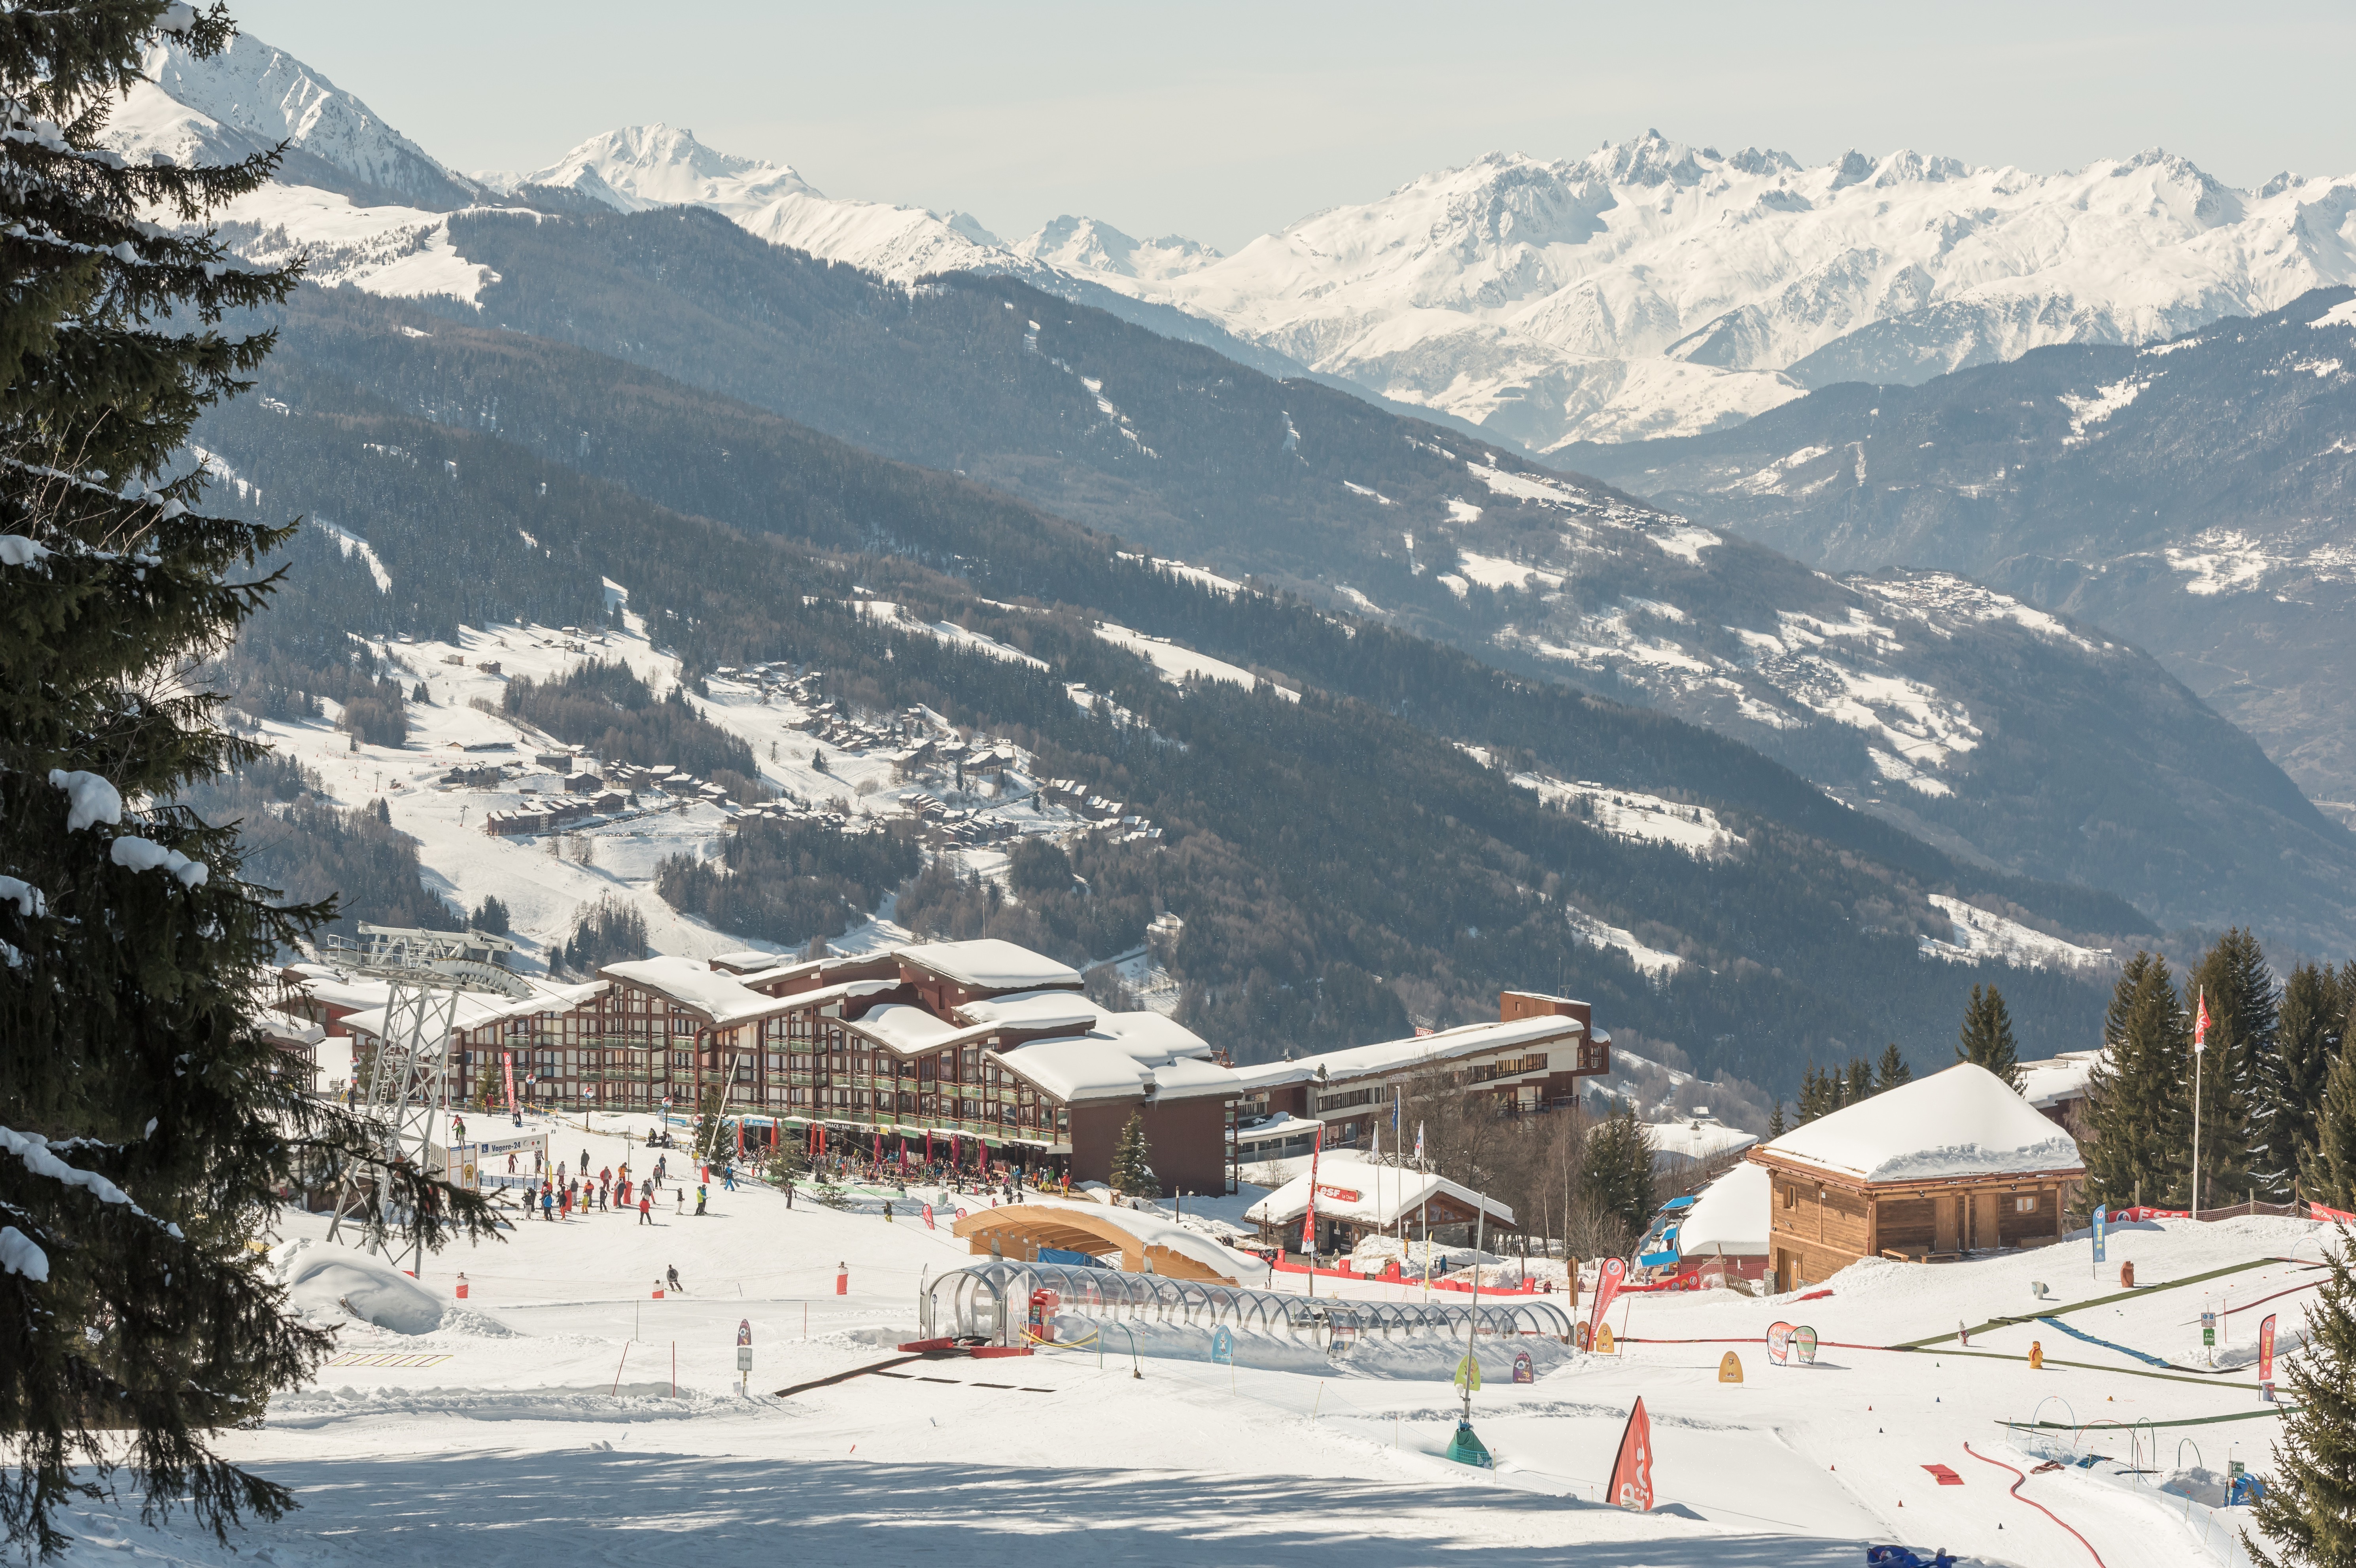 Les Arcs is a great French resort for early season skiing